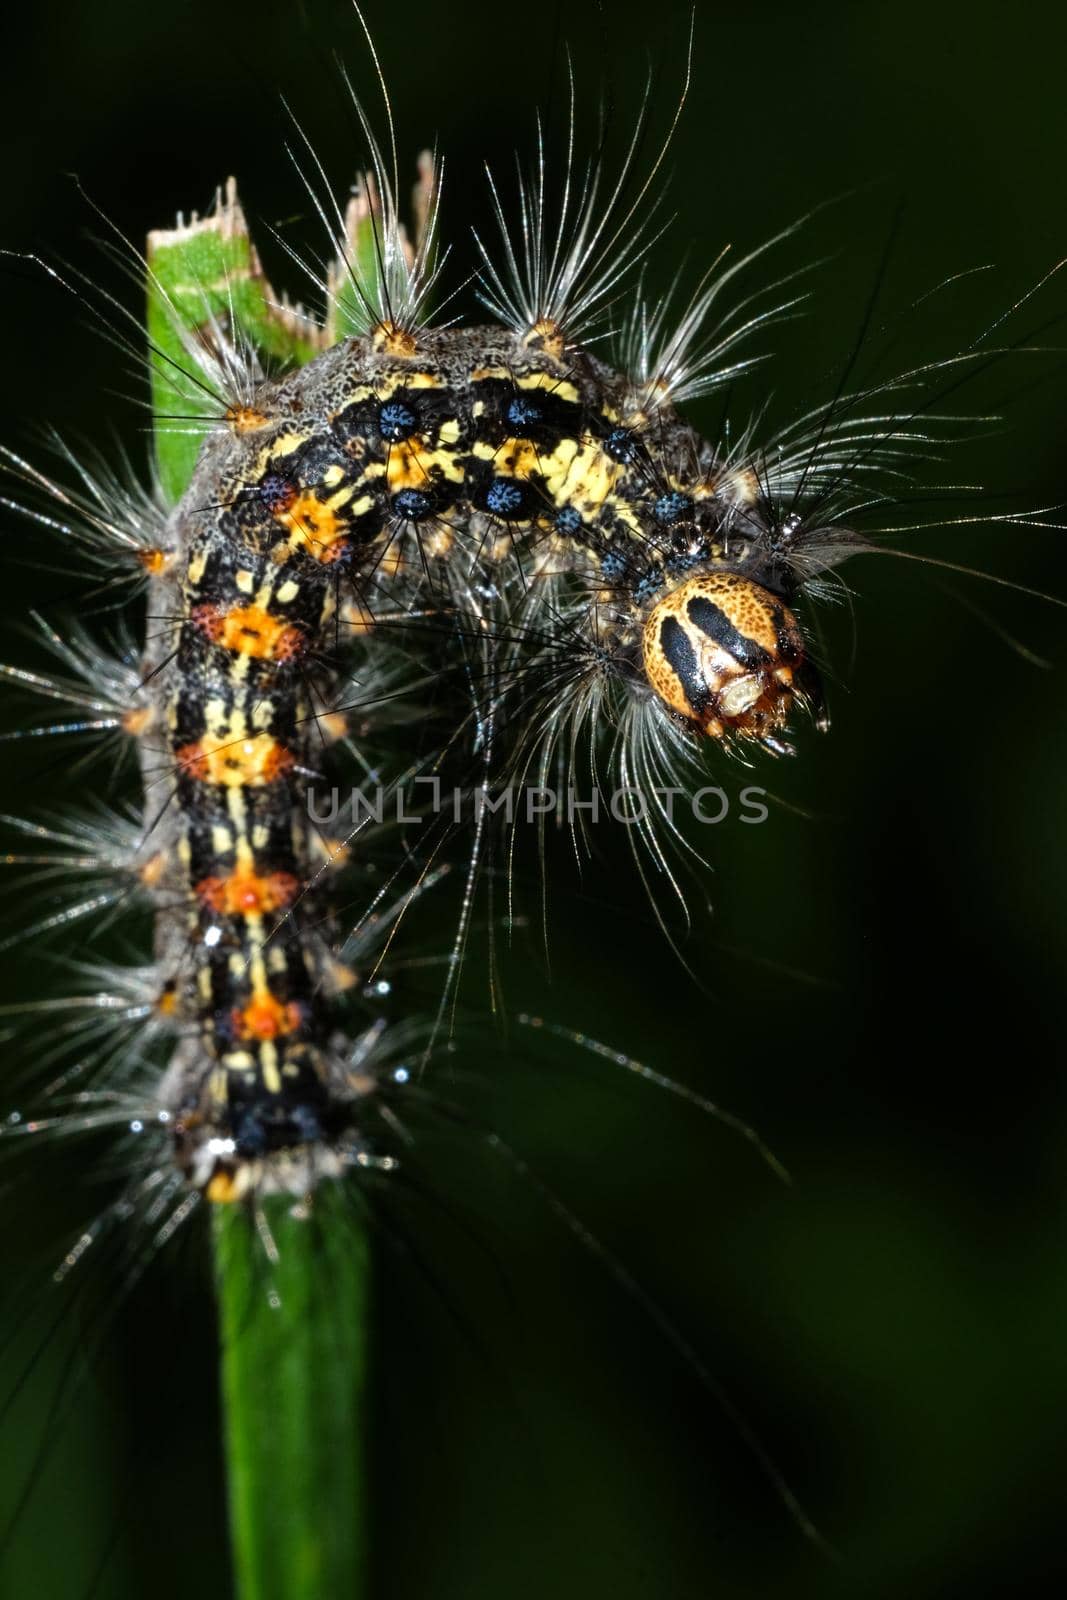 a fluffy caterpillar with a yellow stripe on its back crawls on a blade of grass close up by karpovkottt